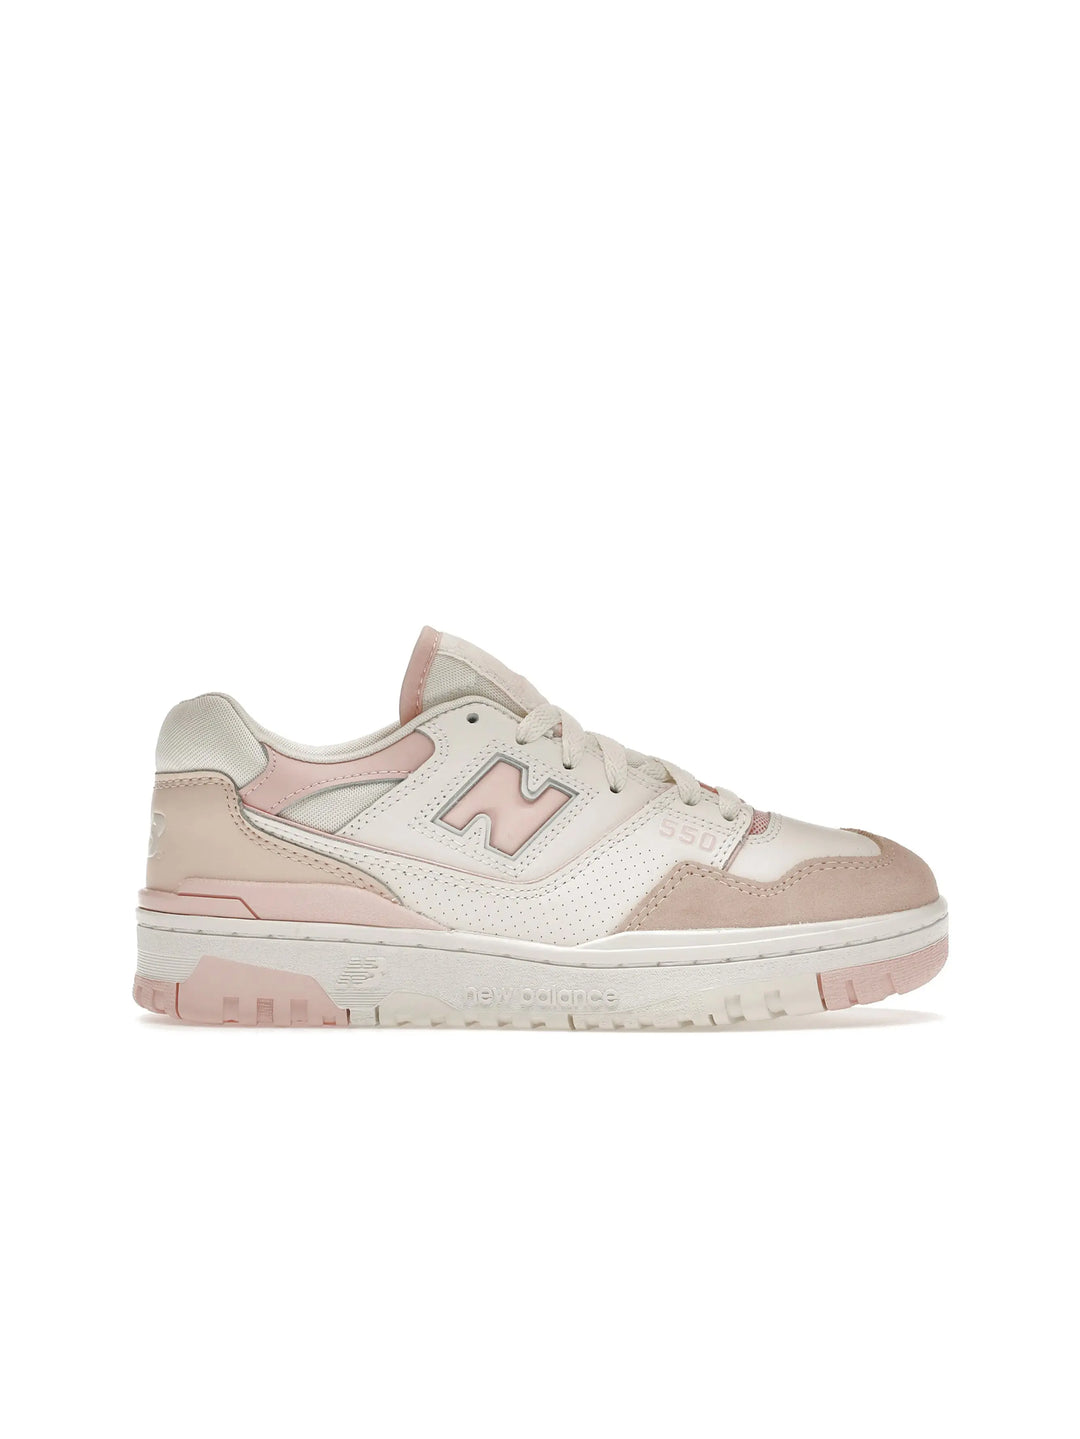 New Balance 550 White Pink (Women's) in Auckland, New Zealand - Shop name